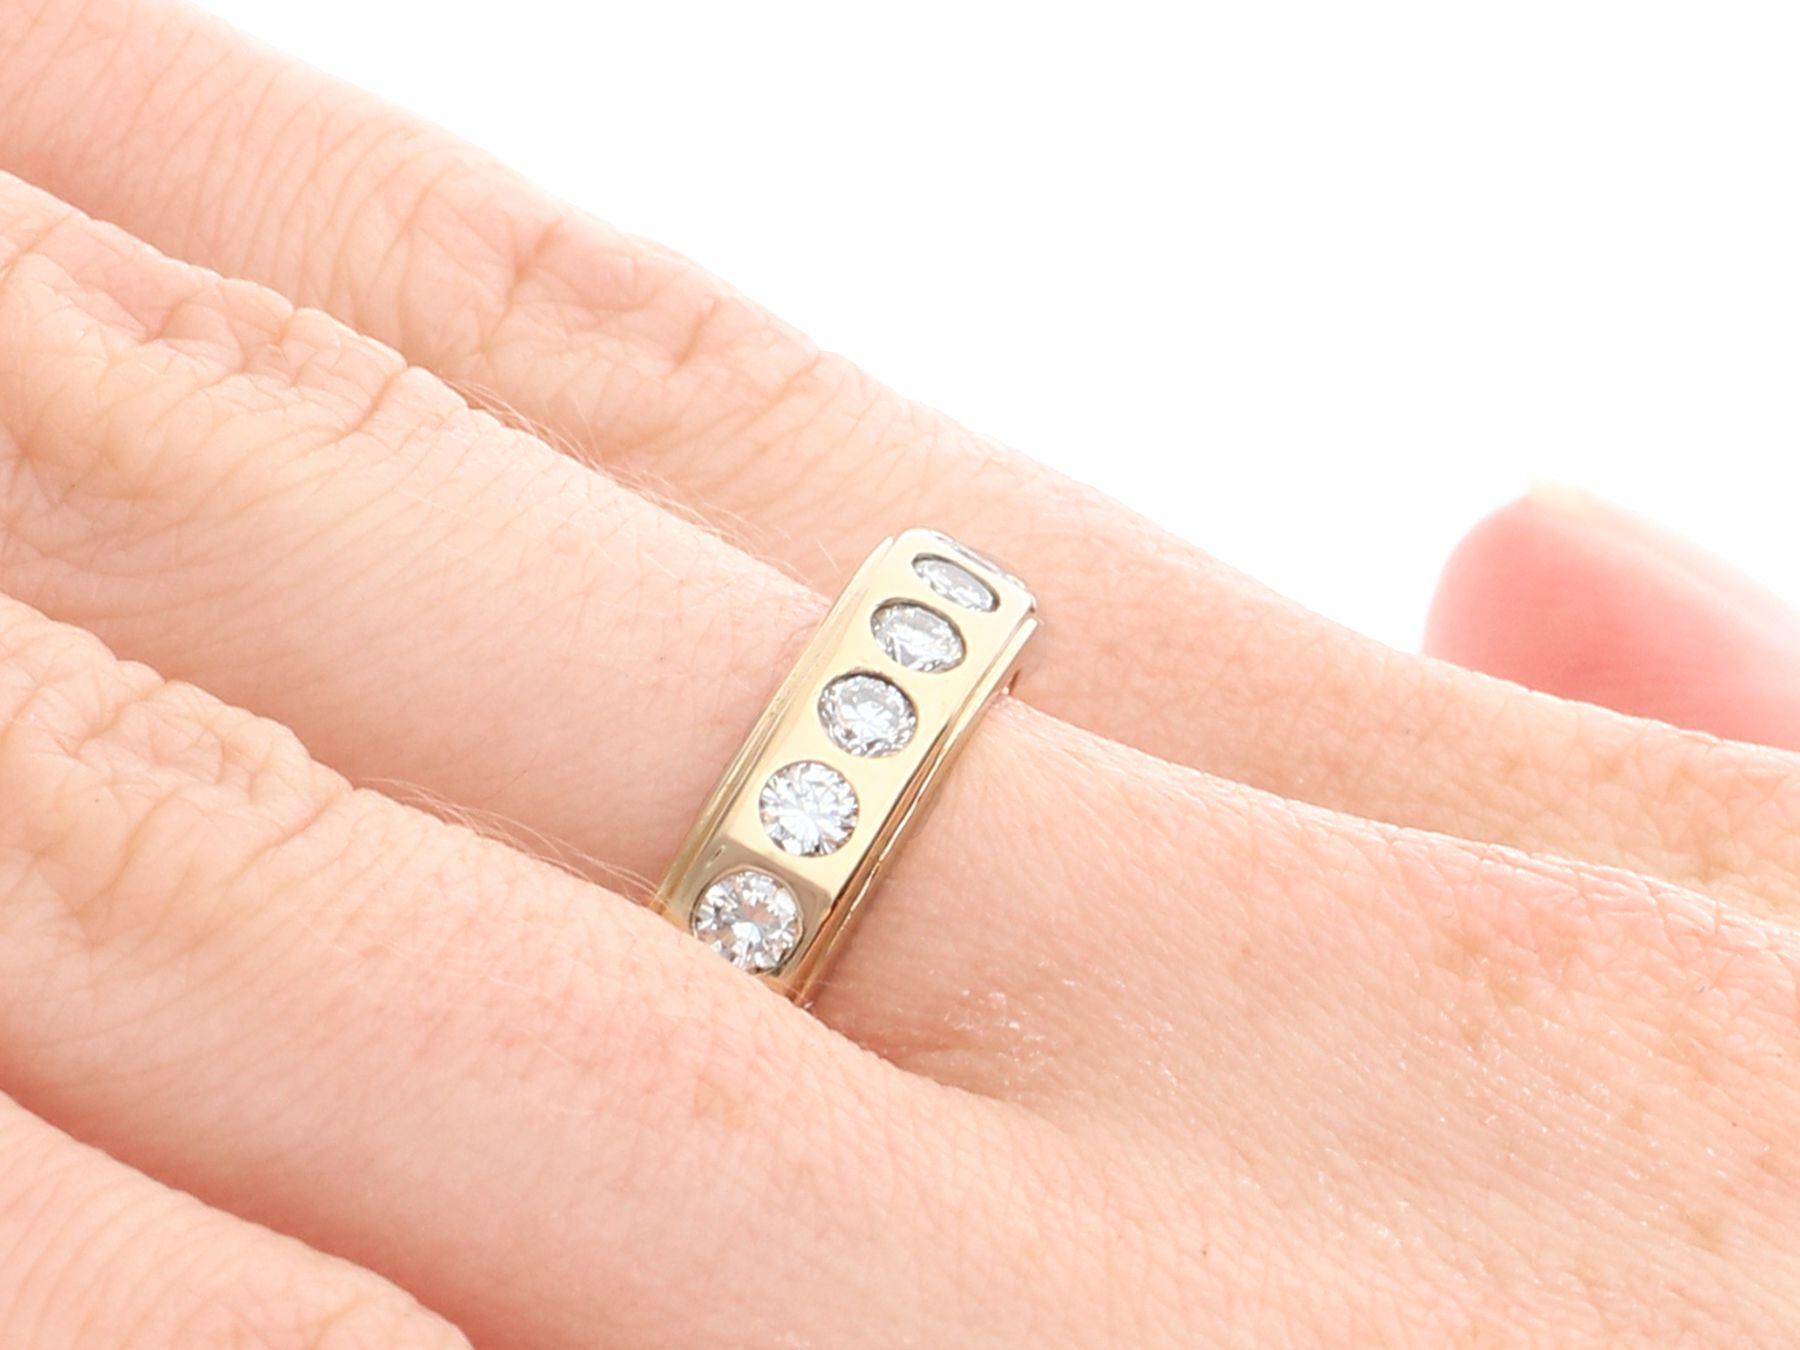 Vintage 1.76 carat Diamond and Yellow Gold Full Eternity Ring, circa 1960 For Sale 1